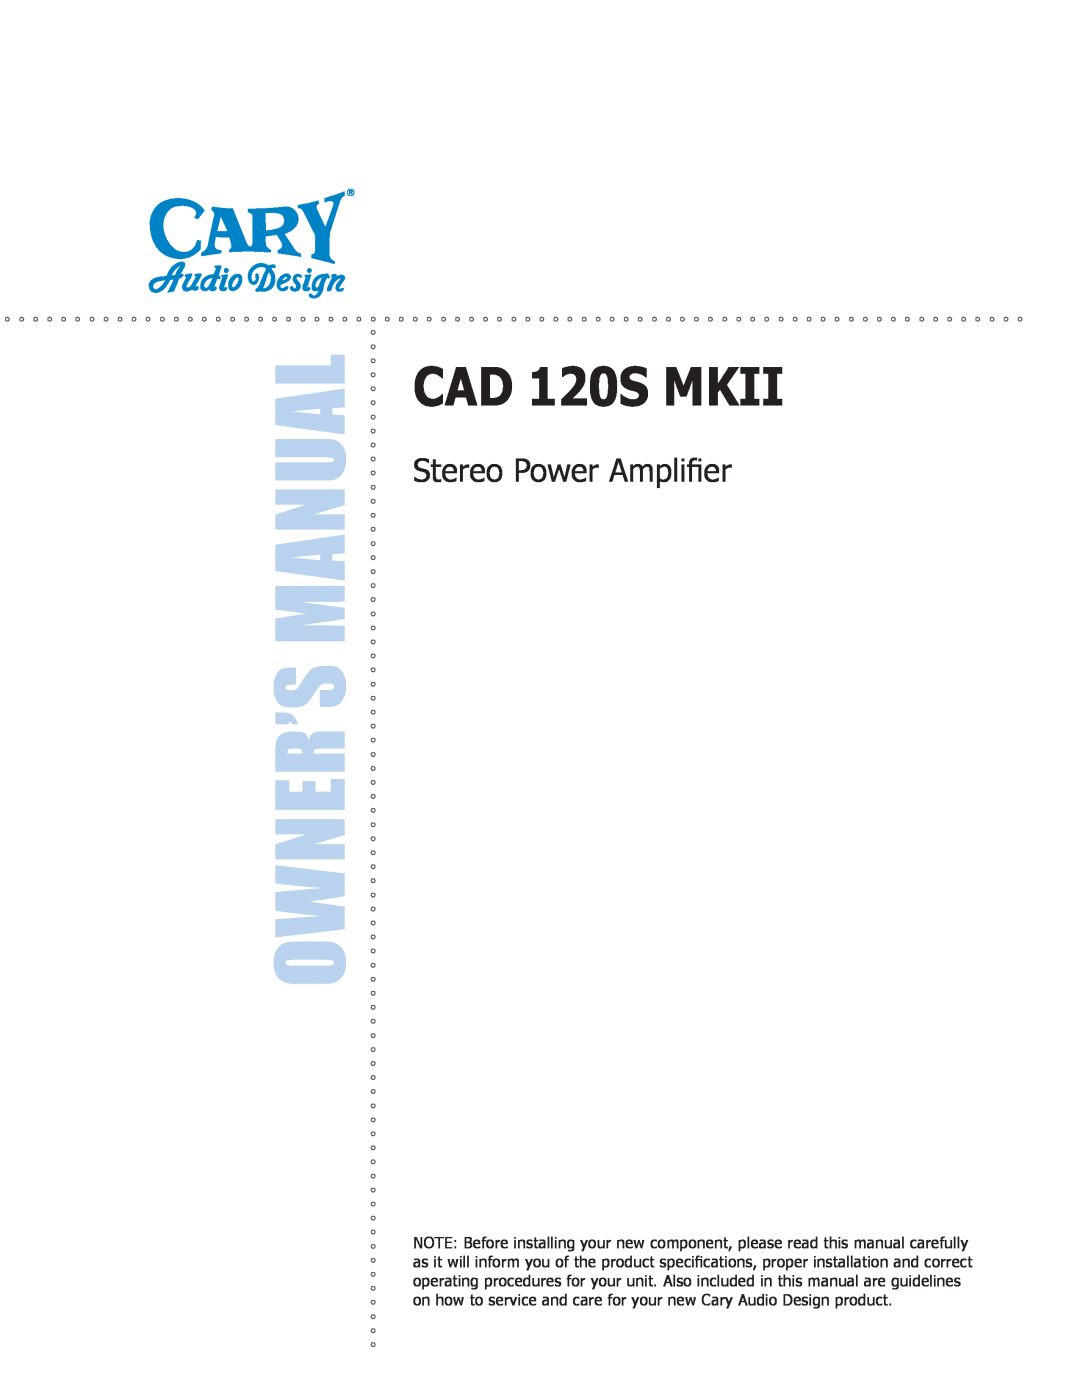 Cary Audio Design CAD 120S MKII owner manual Stereo Power Amplifier 